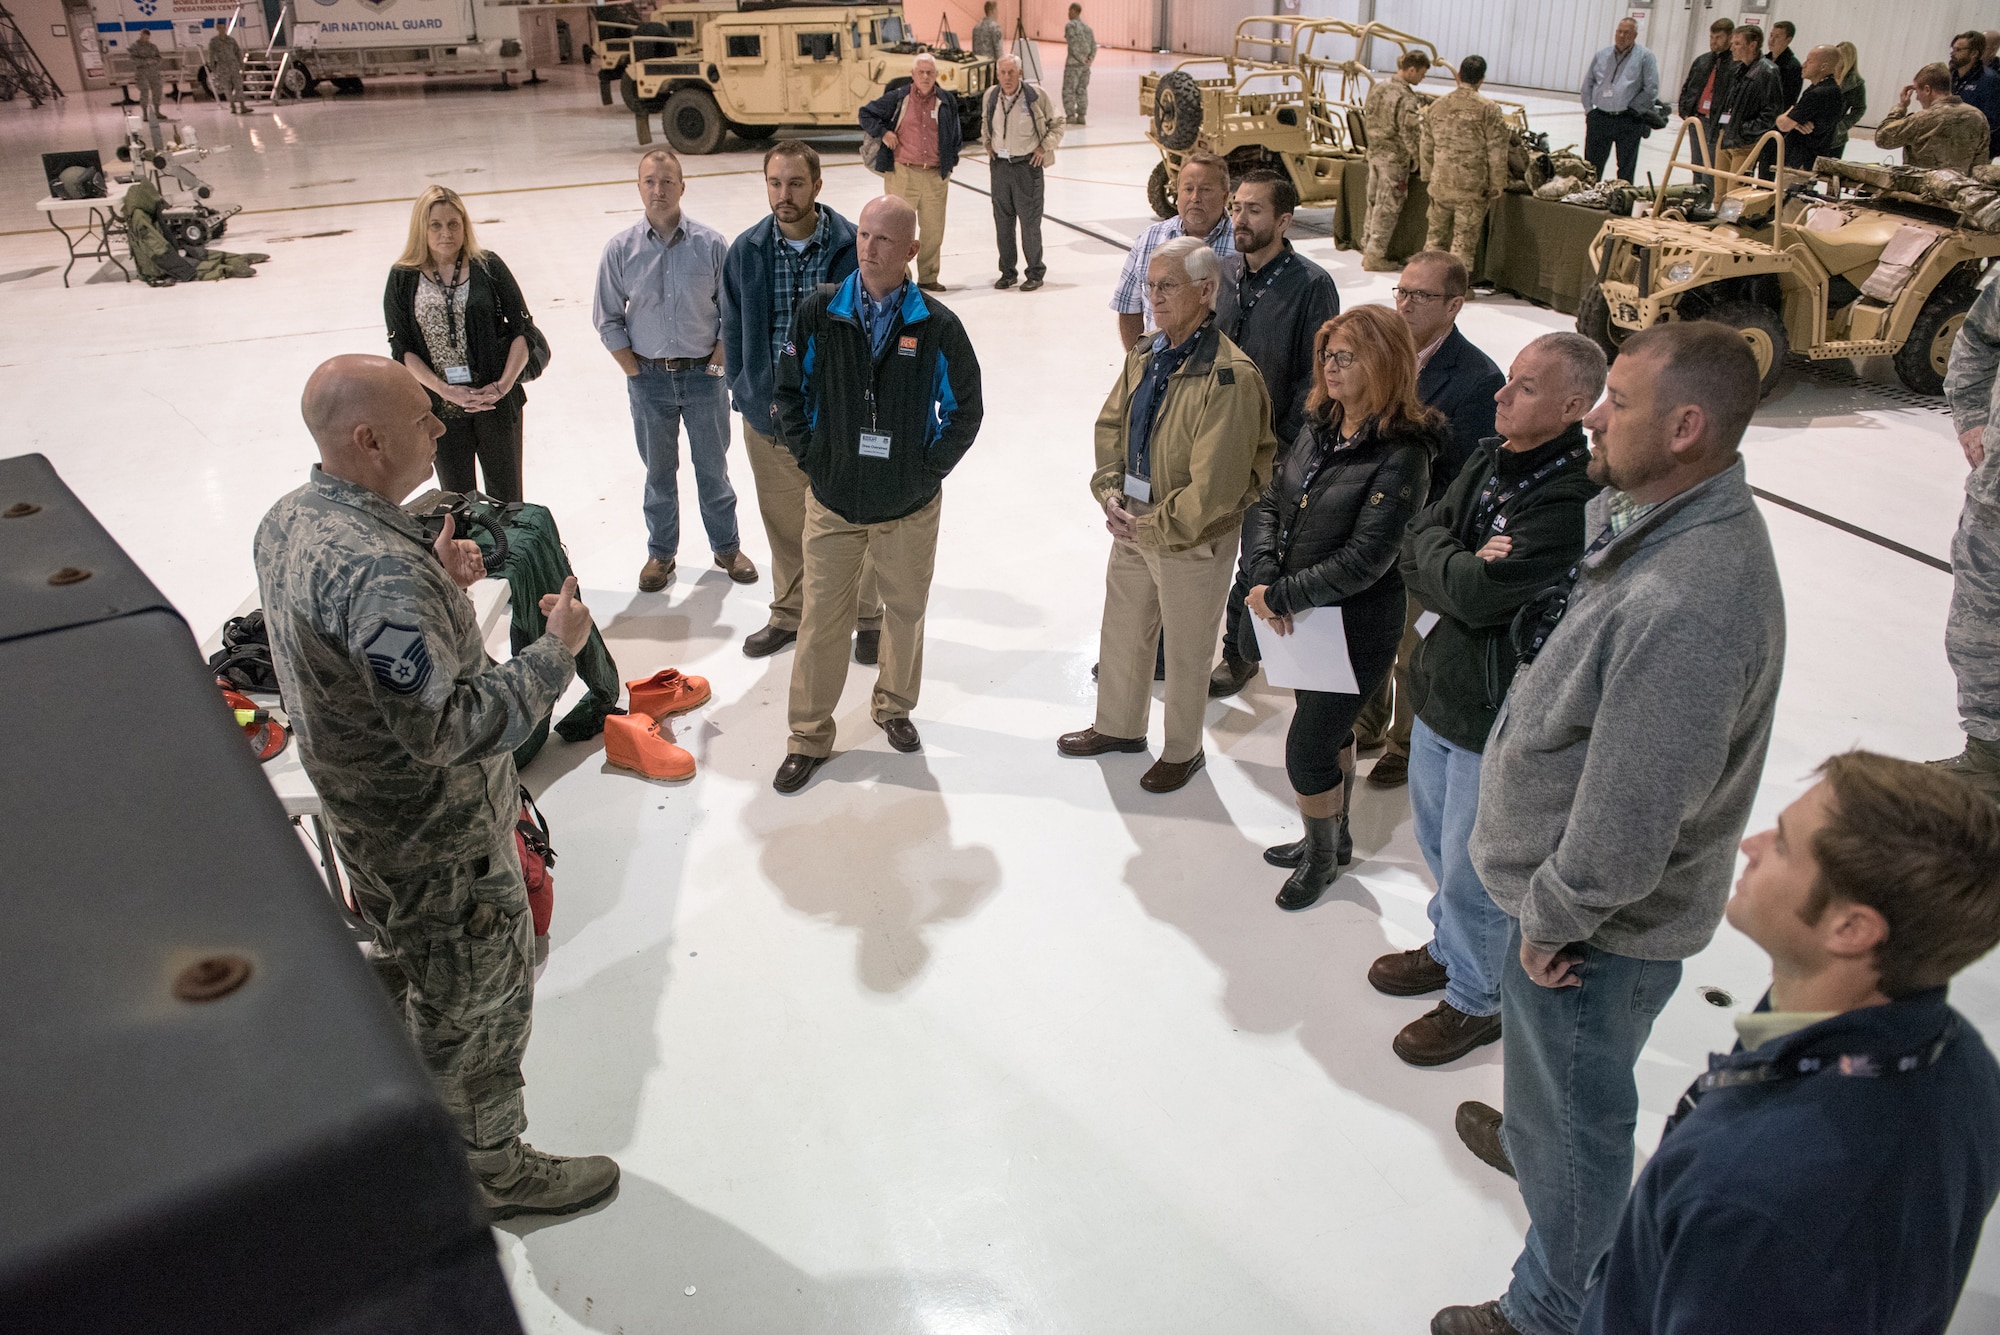 Master Sgt. Aaron Foote, services technician for the 123rd Force Support Squadron, explains to civilian employers the military duties of the unit’s Fatality Search and Recovery Team during an Employer Support of the Guard and Reserve “Bosslift” at the Kentucky Air National Guard Base in Louisville, Ky., Oct. 26, 2016. The Bosslift gave employers the opportunity to see what their employees do when they are serving as reservists in the Kentucky Air National Guard. (U.S. Air National Guard photo by Master Sgt. Phil Speck)